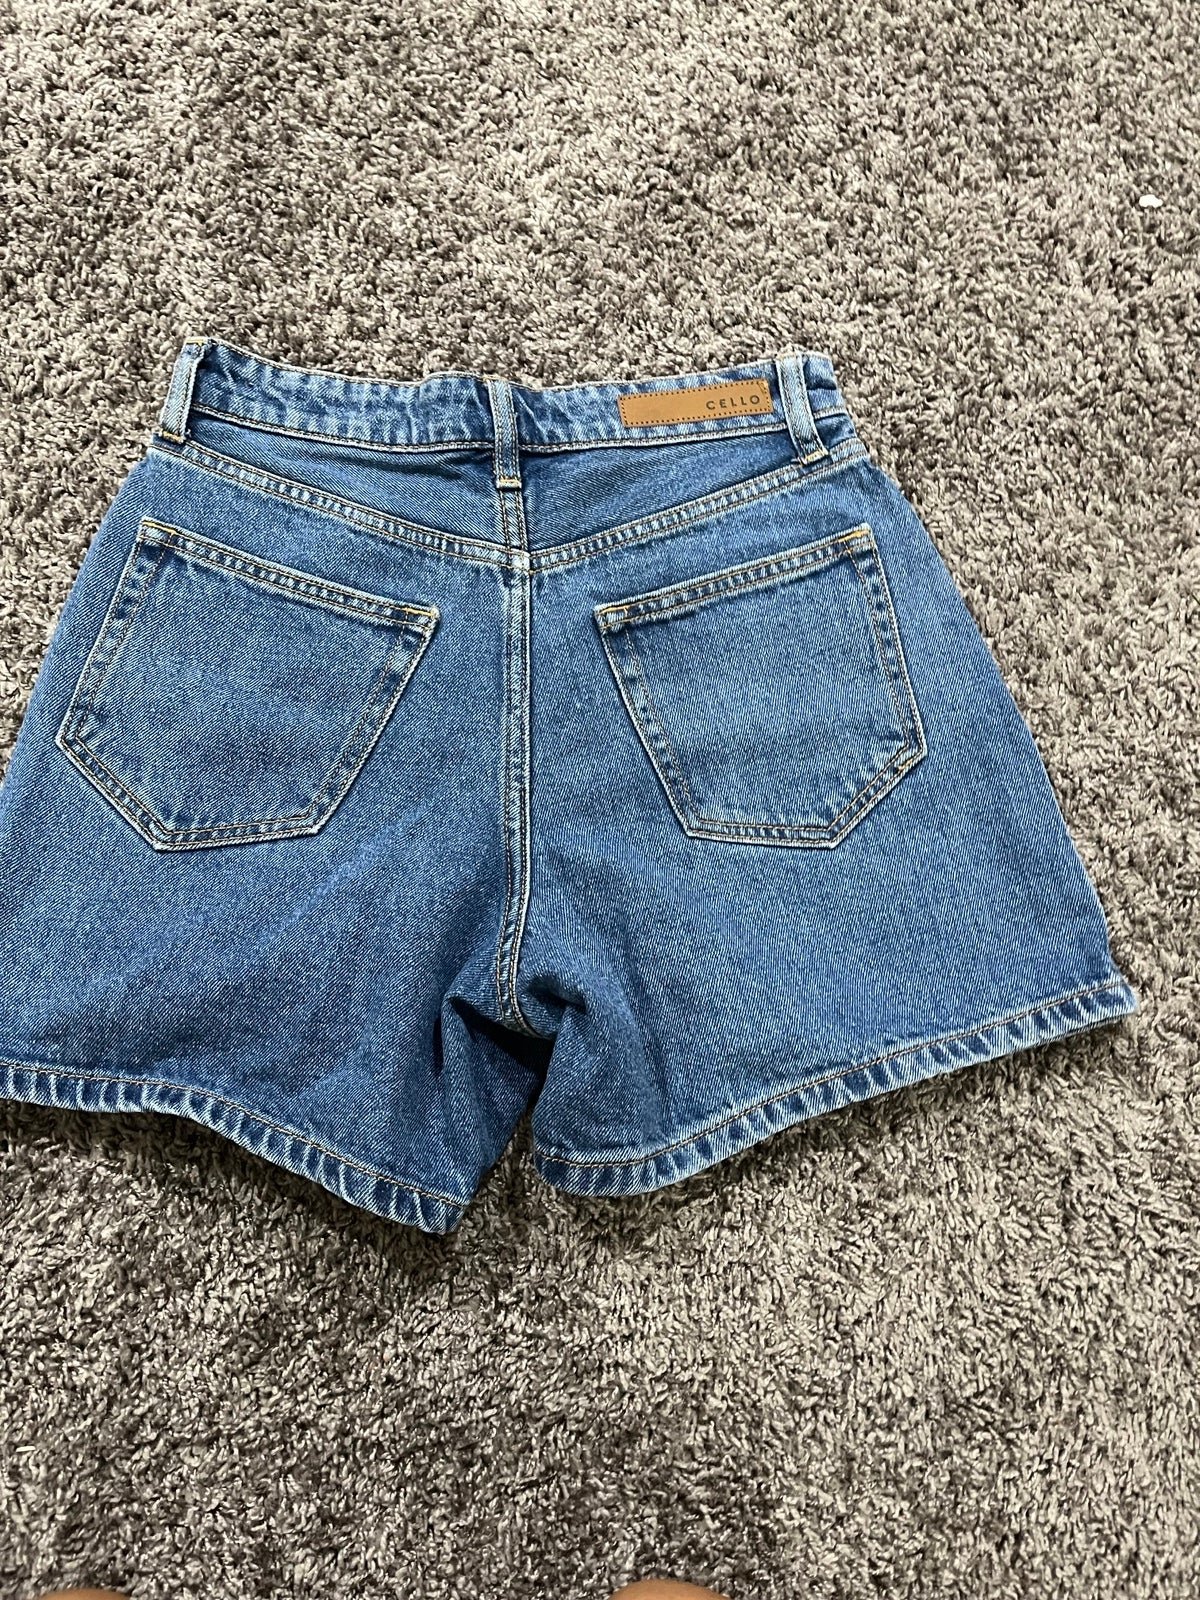 Classic Jean shorts On5gqoNQZ for sale